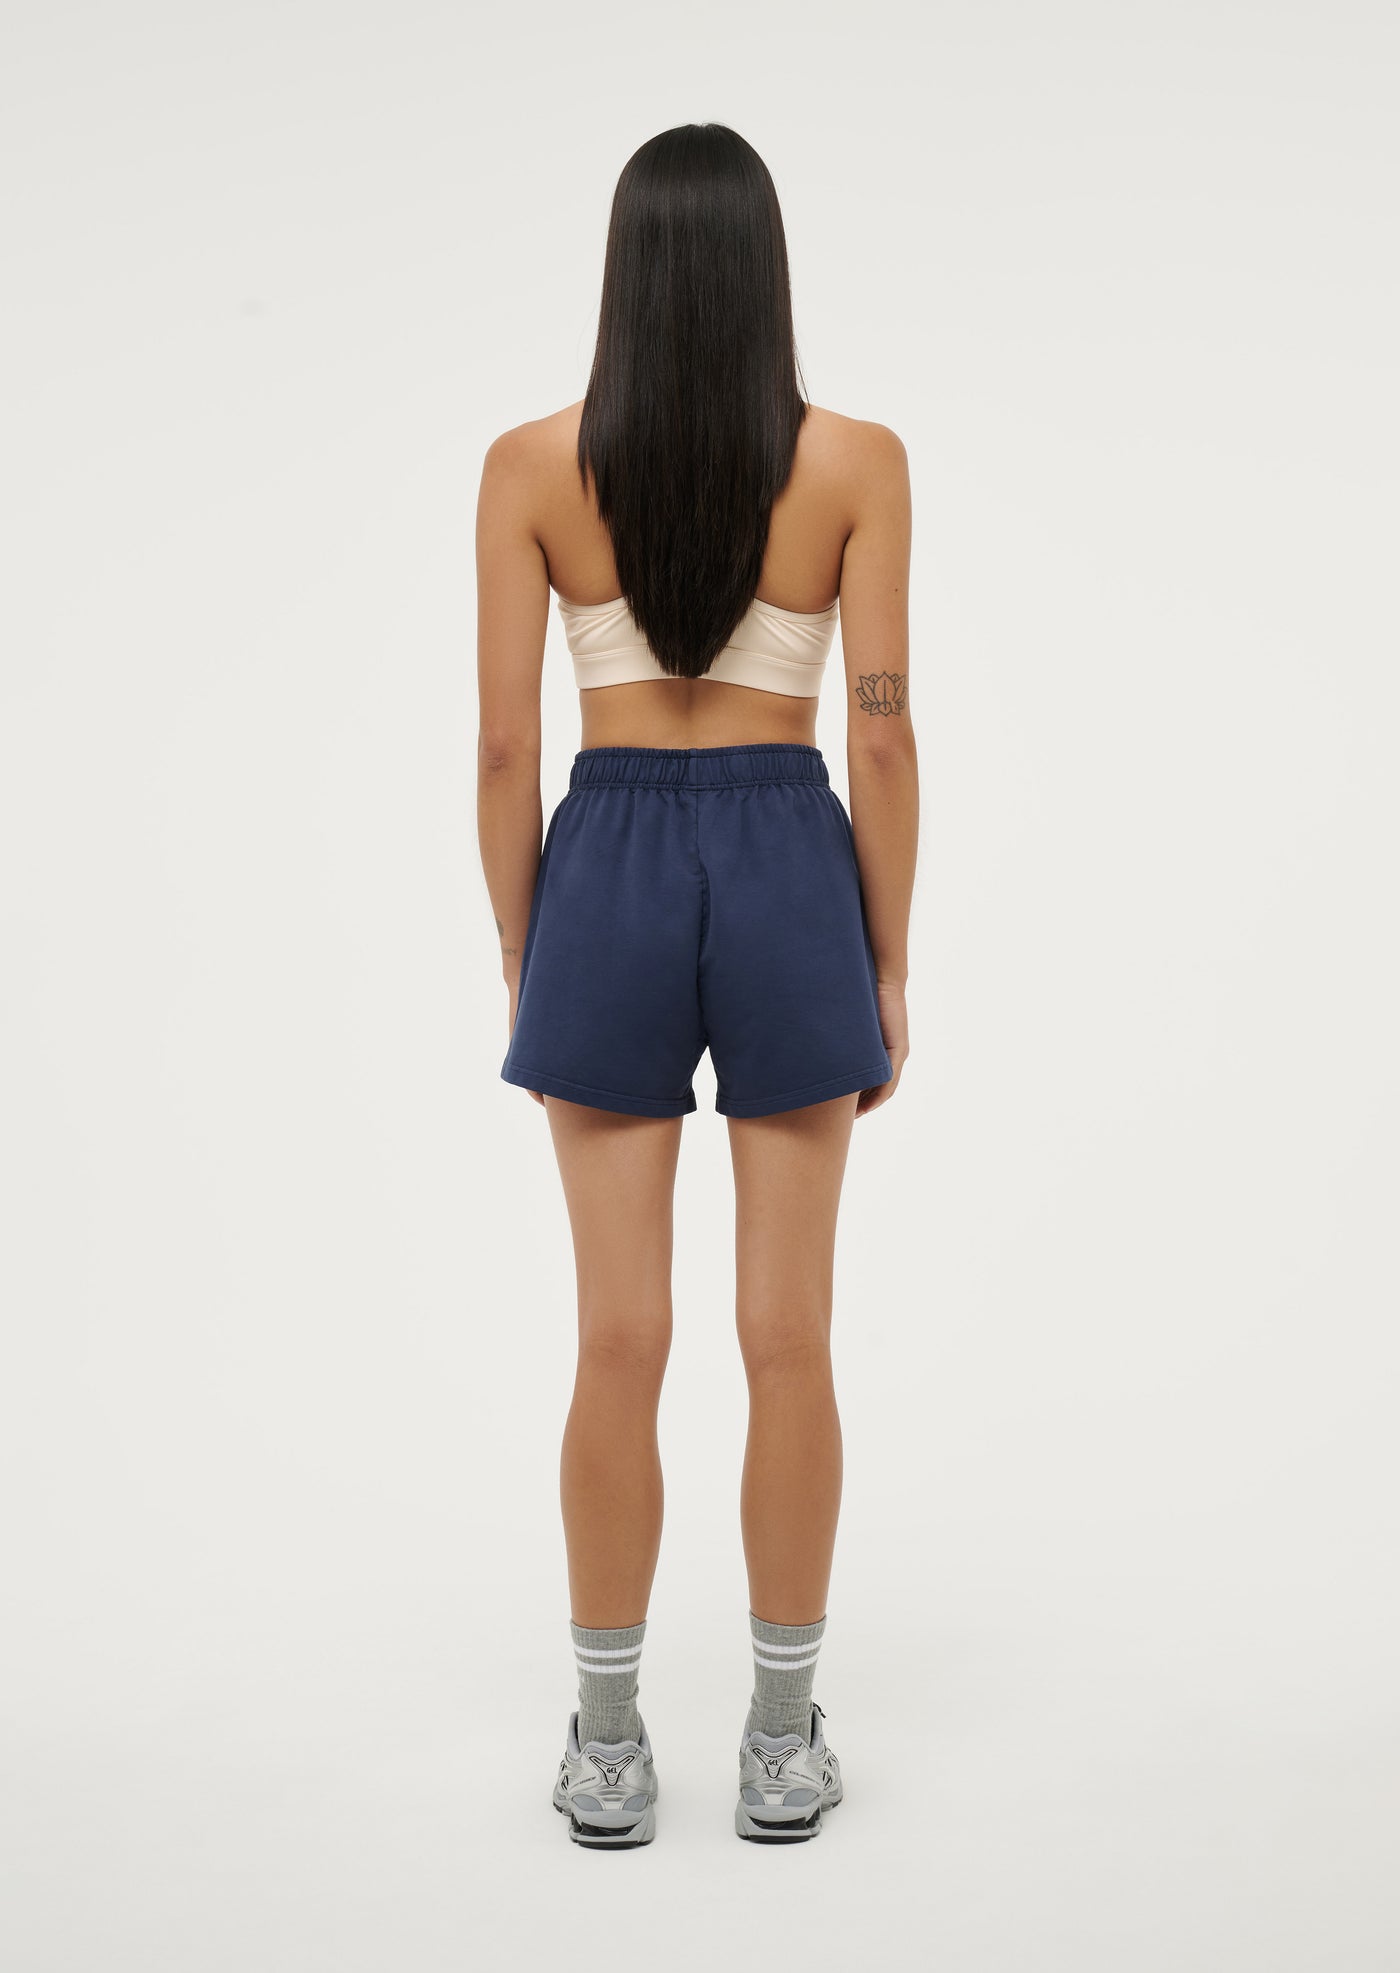 PHYSICAL SHORT IN WASHED DARK NAVY